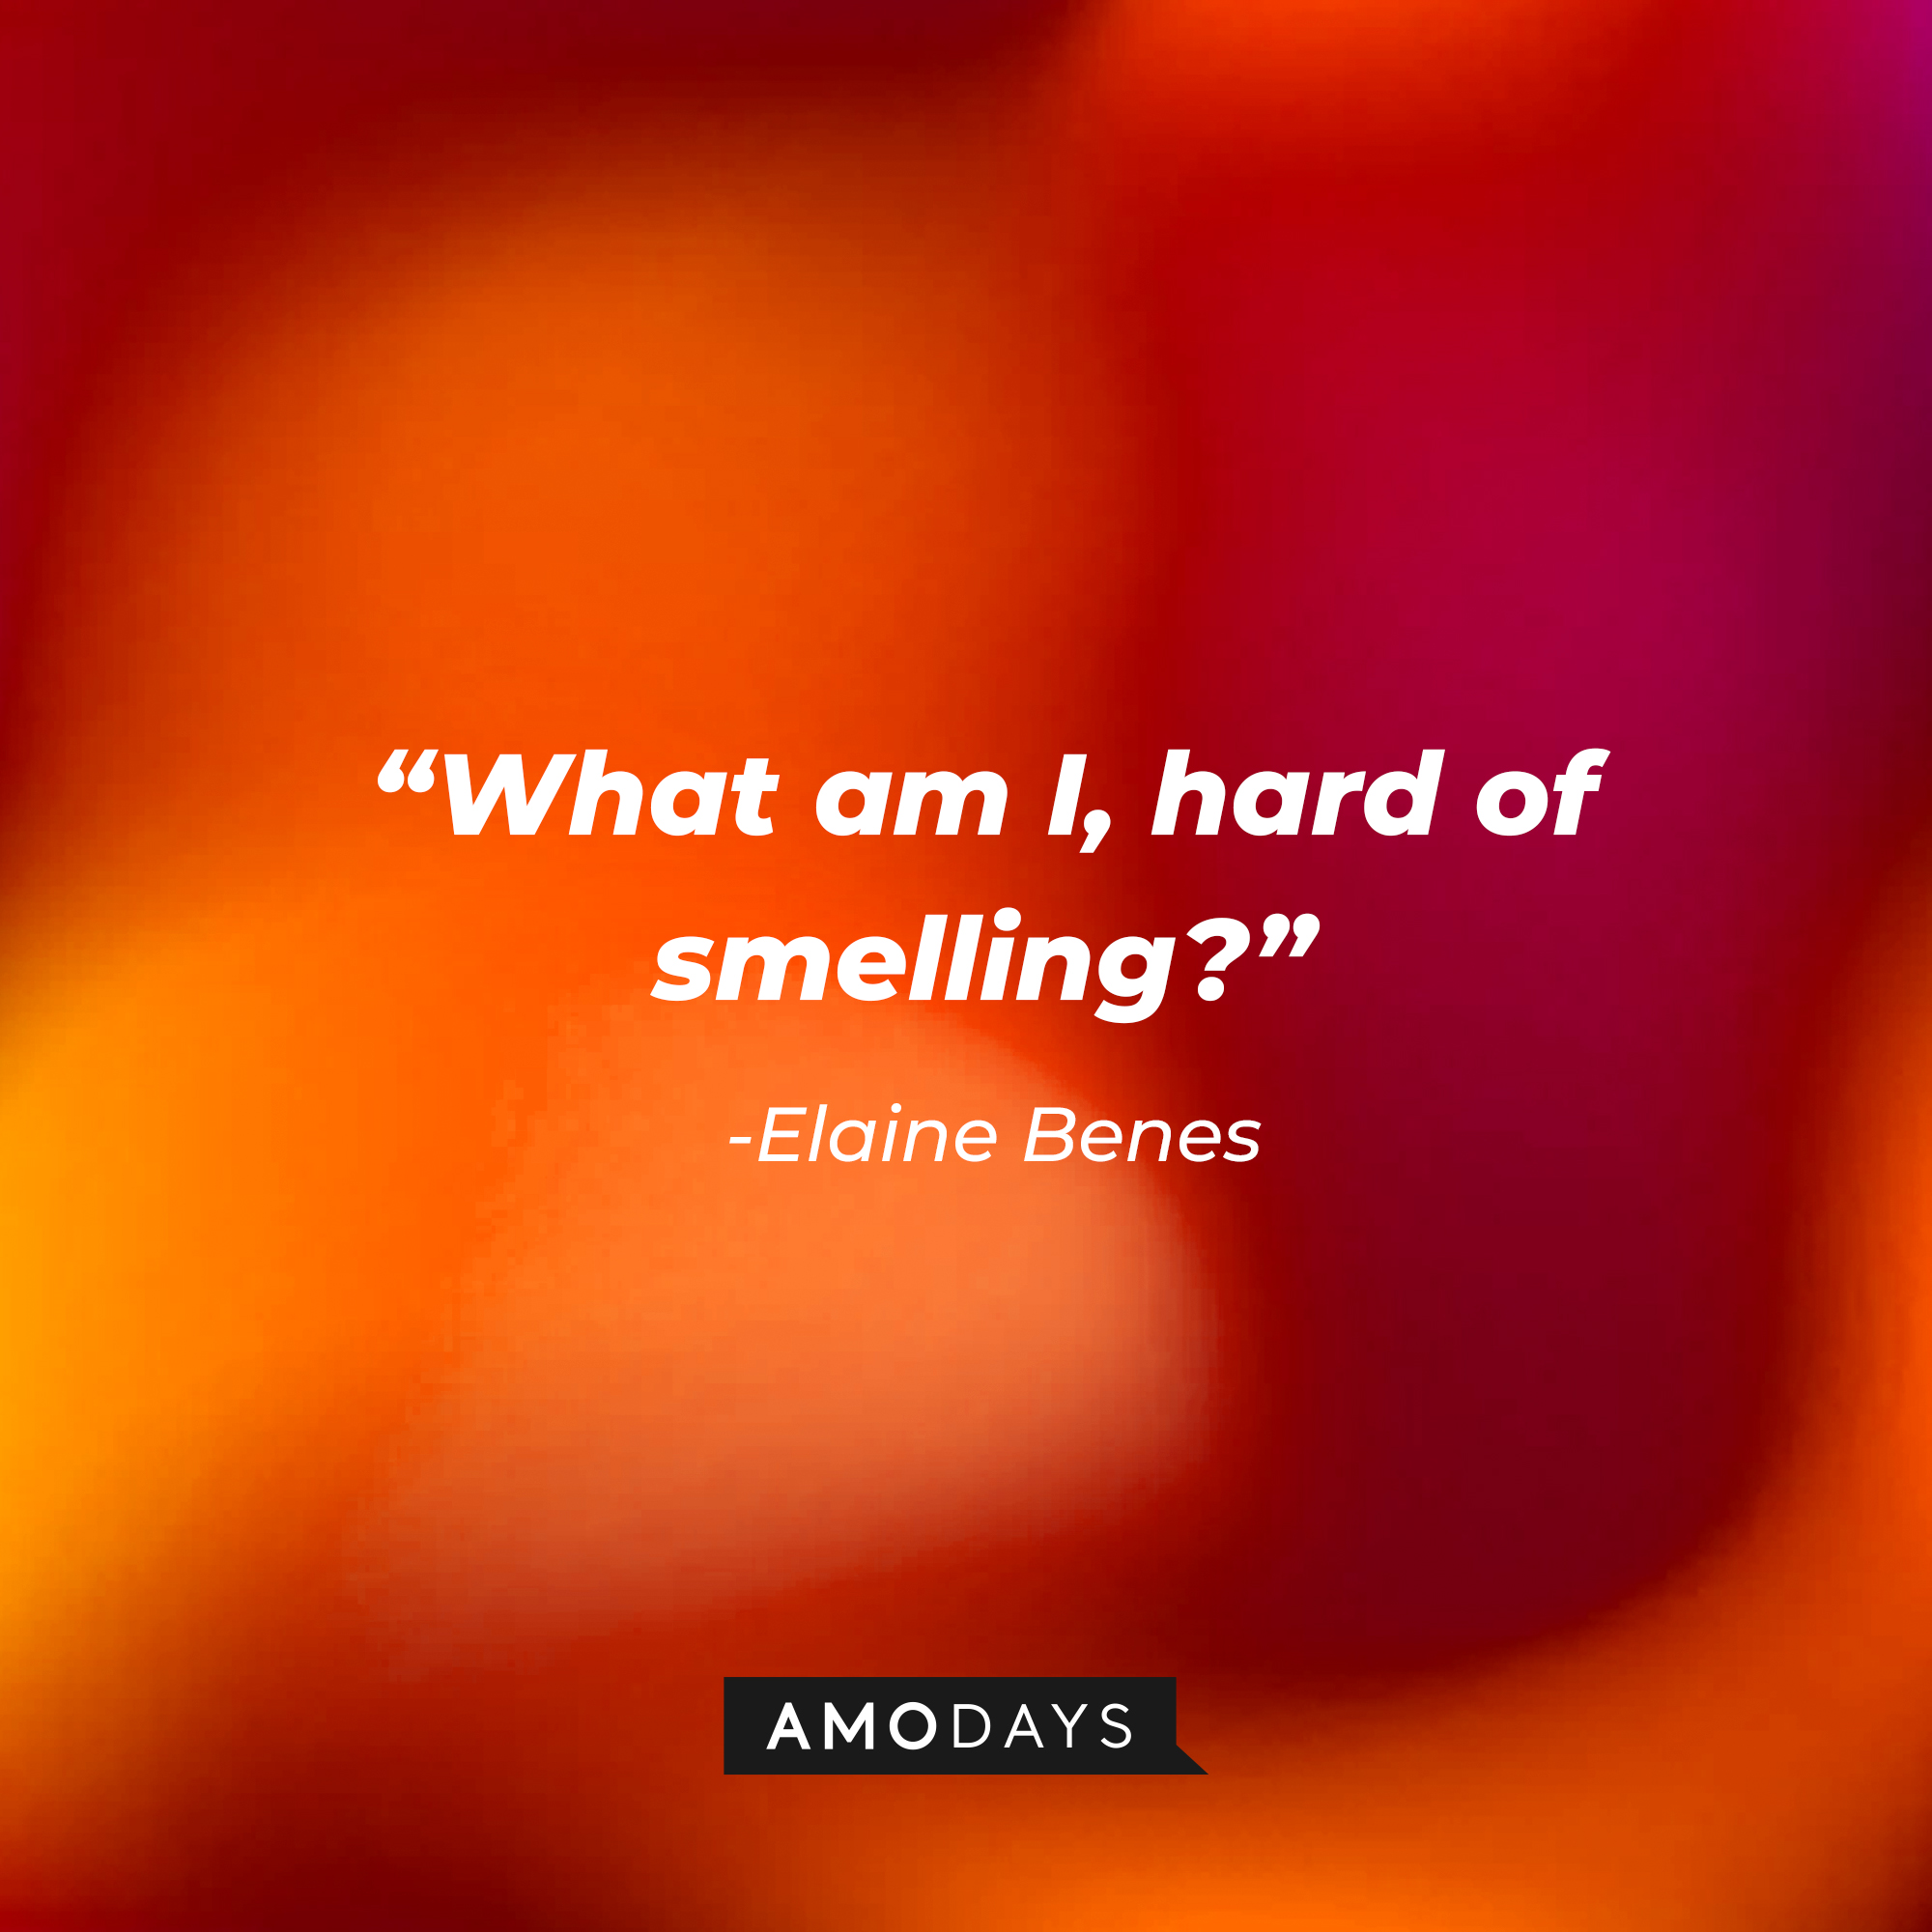 Elaine Benes quote: “What am I, hard of smelling?” | Source: Amodays